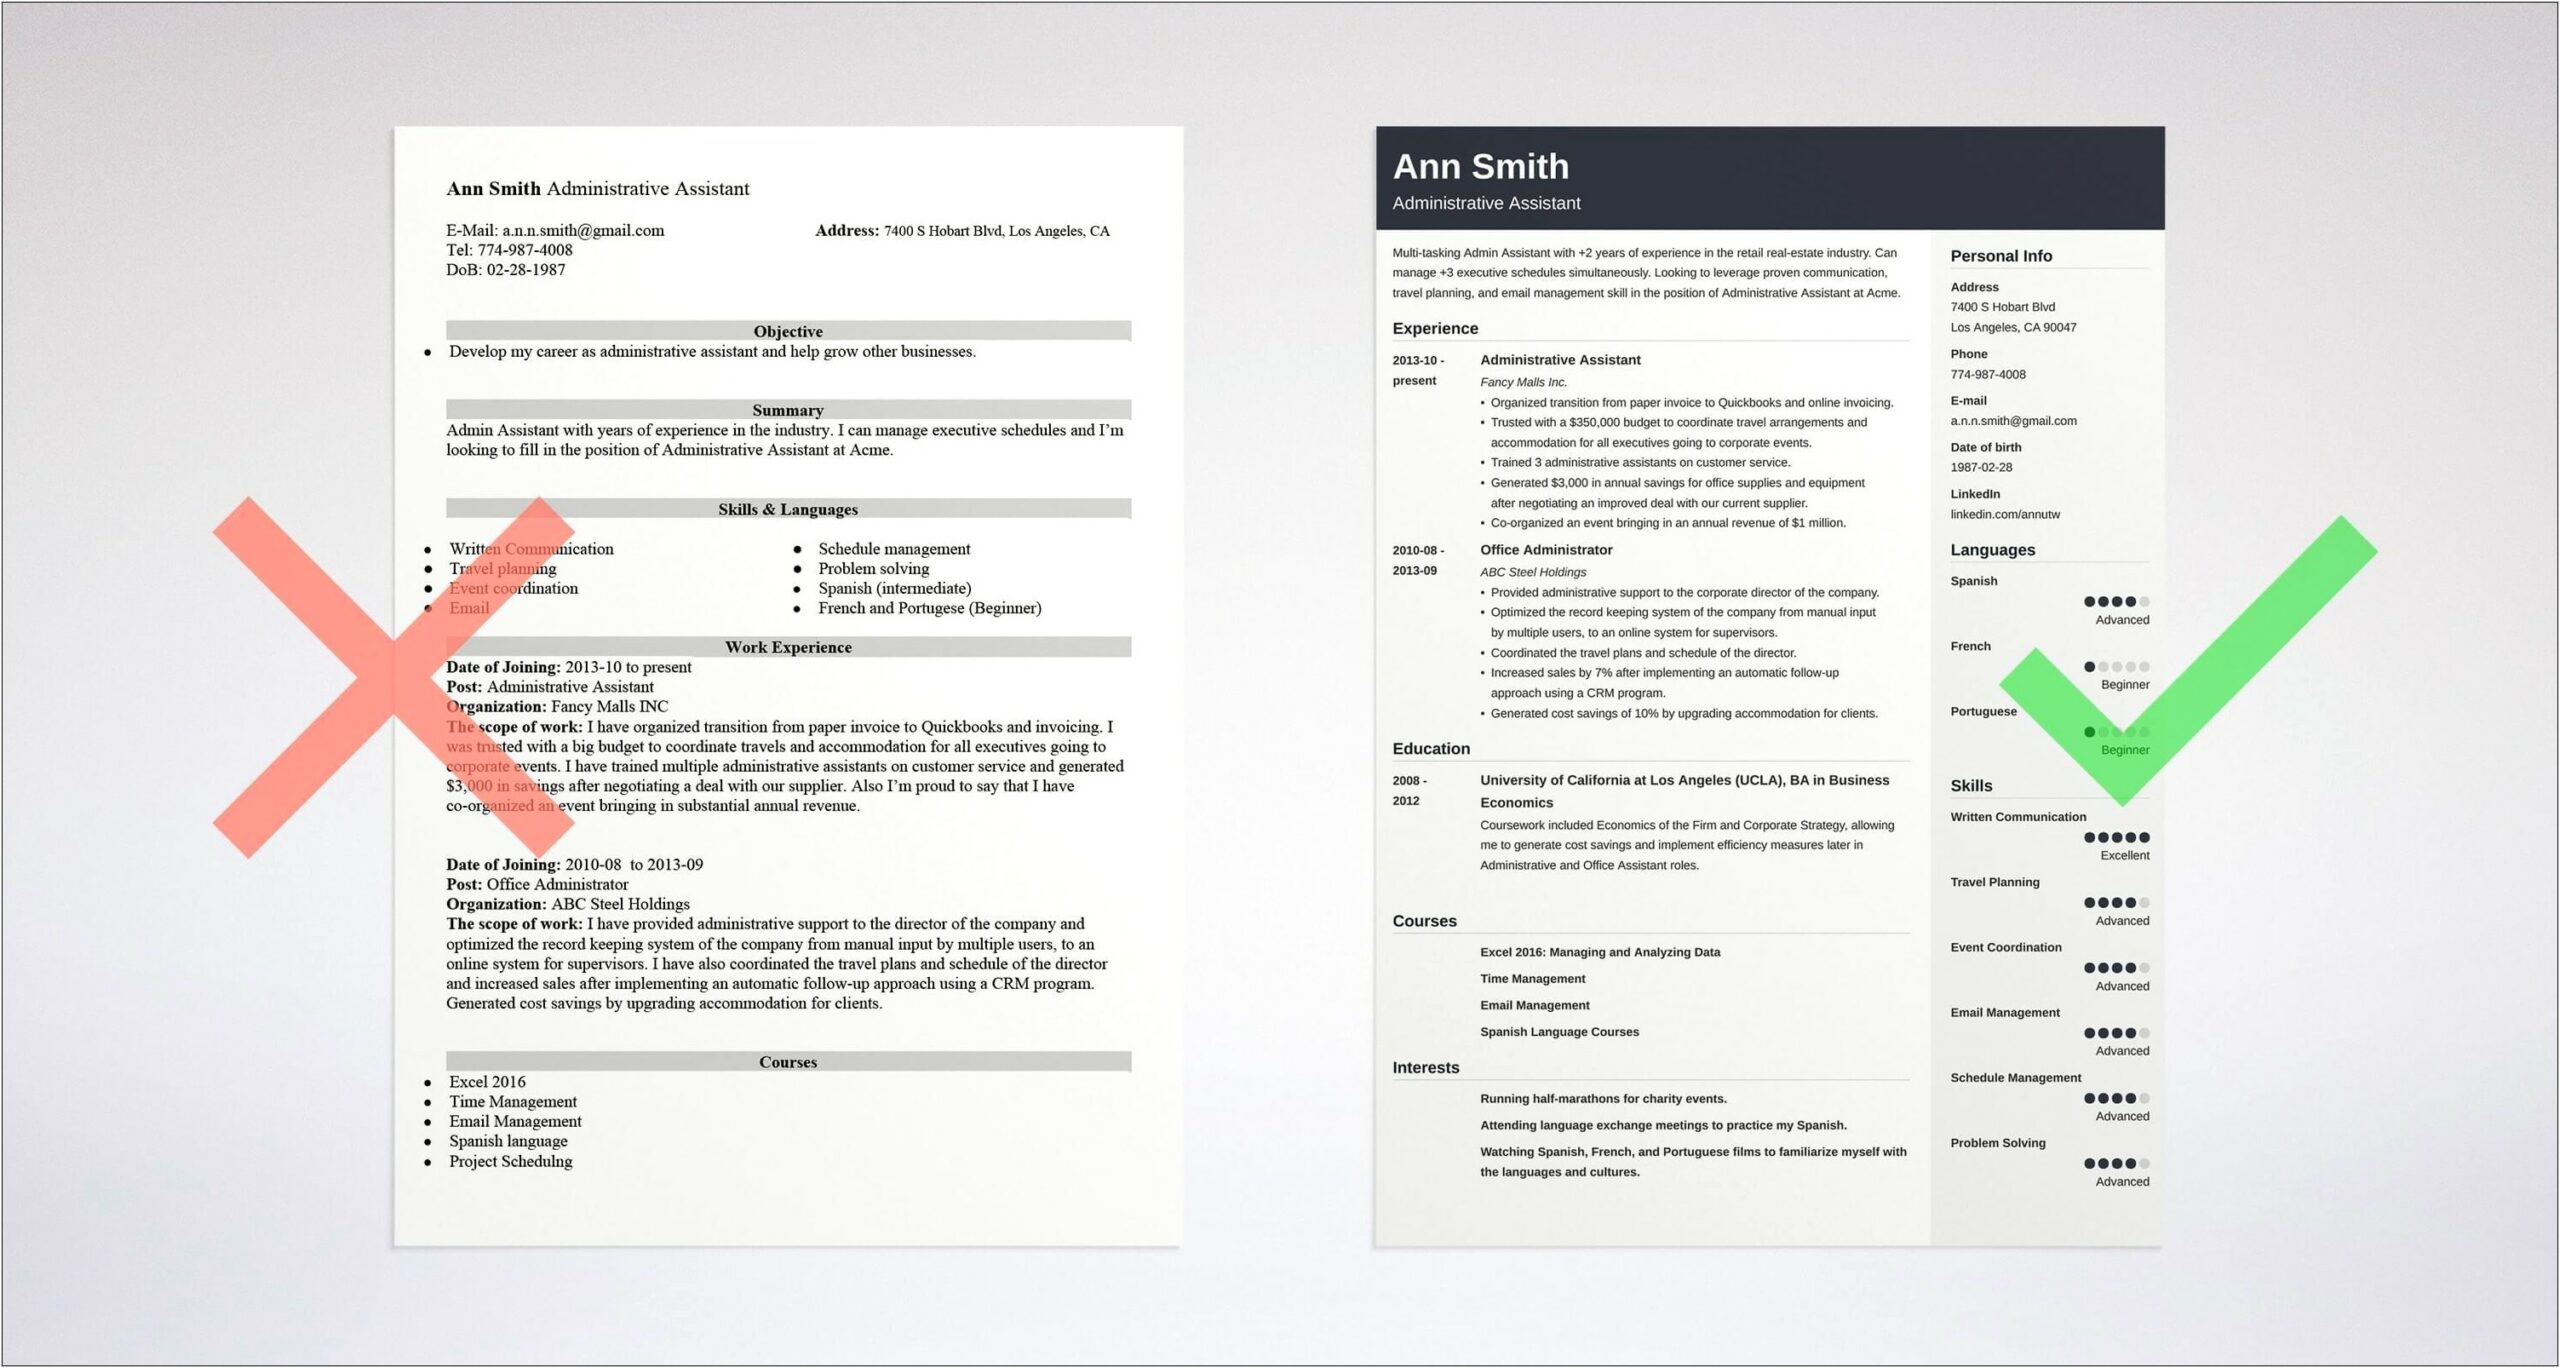 Admistrative Assistant Functional Resume Sample